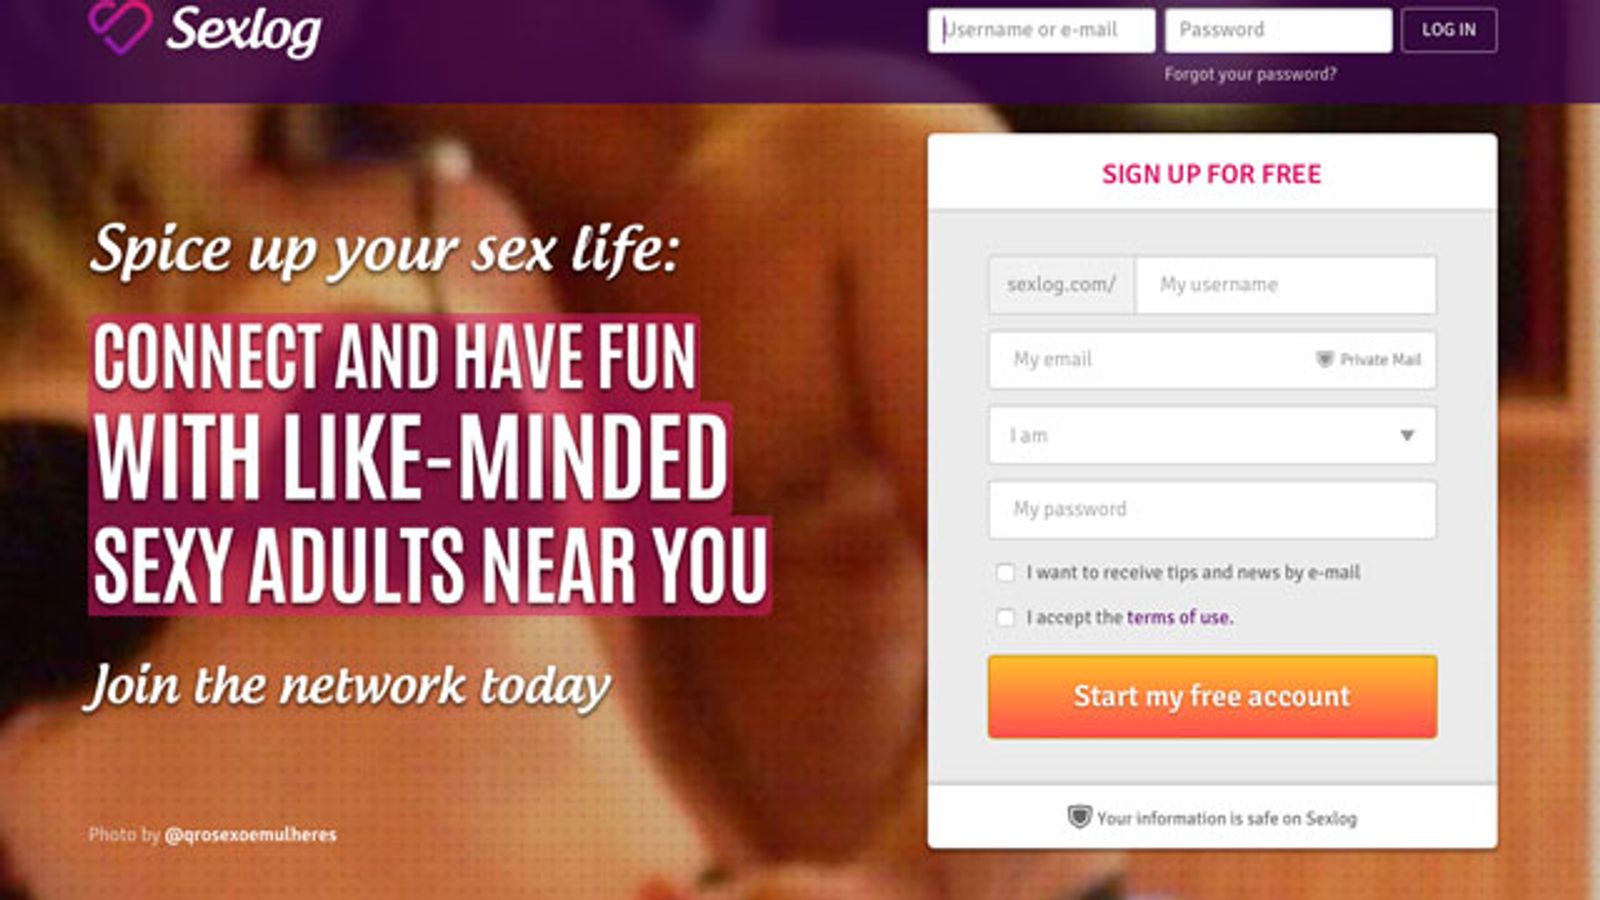 Sexlog, A Sex-Positive Social Network, Now Available In U.S.